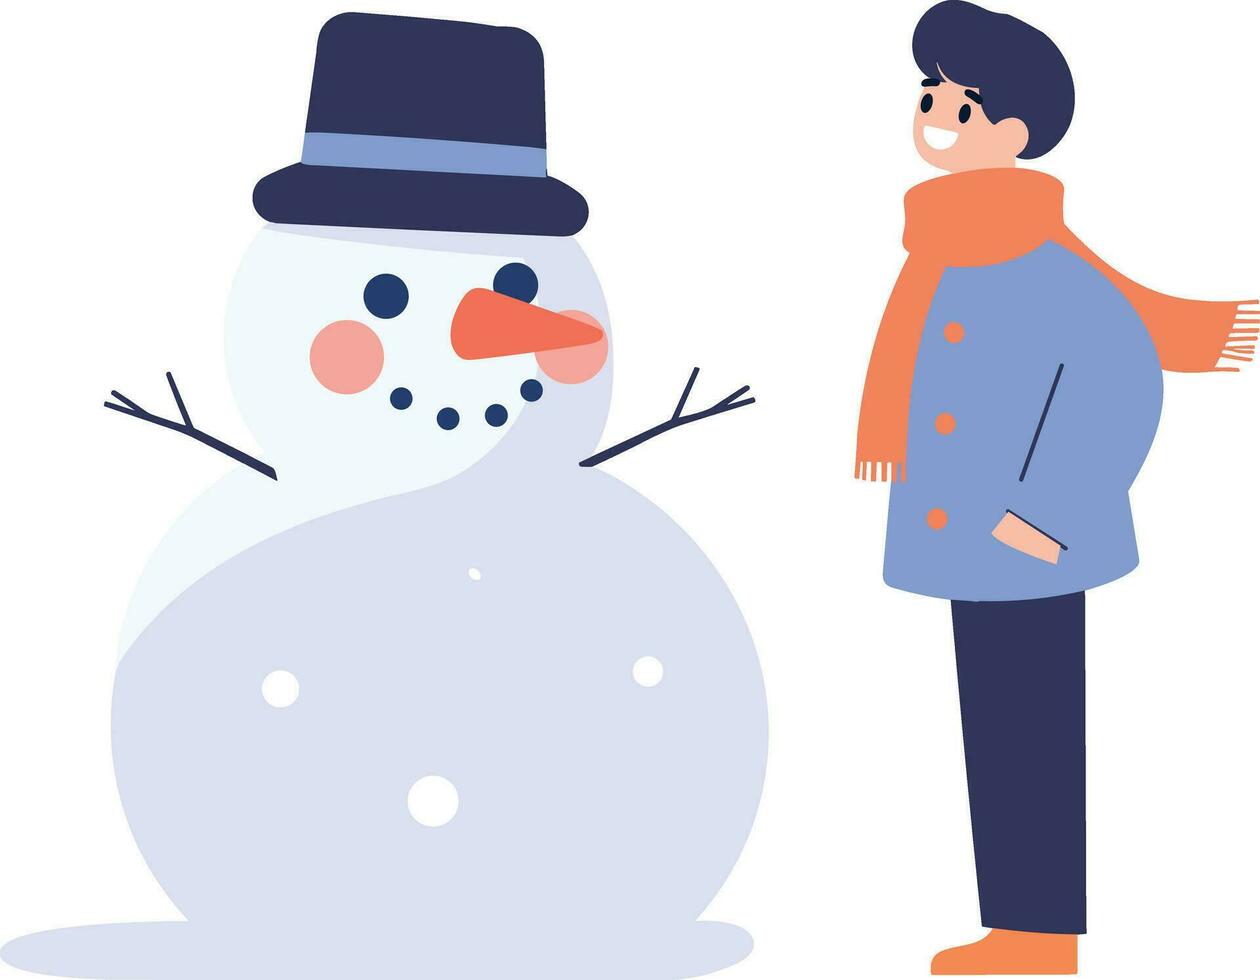 Hand Drawn Child character playing with snowman in winter in flat style vector